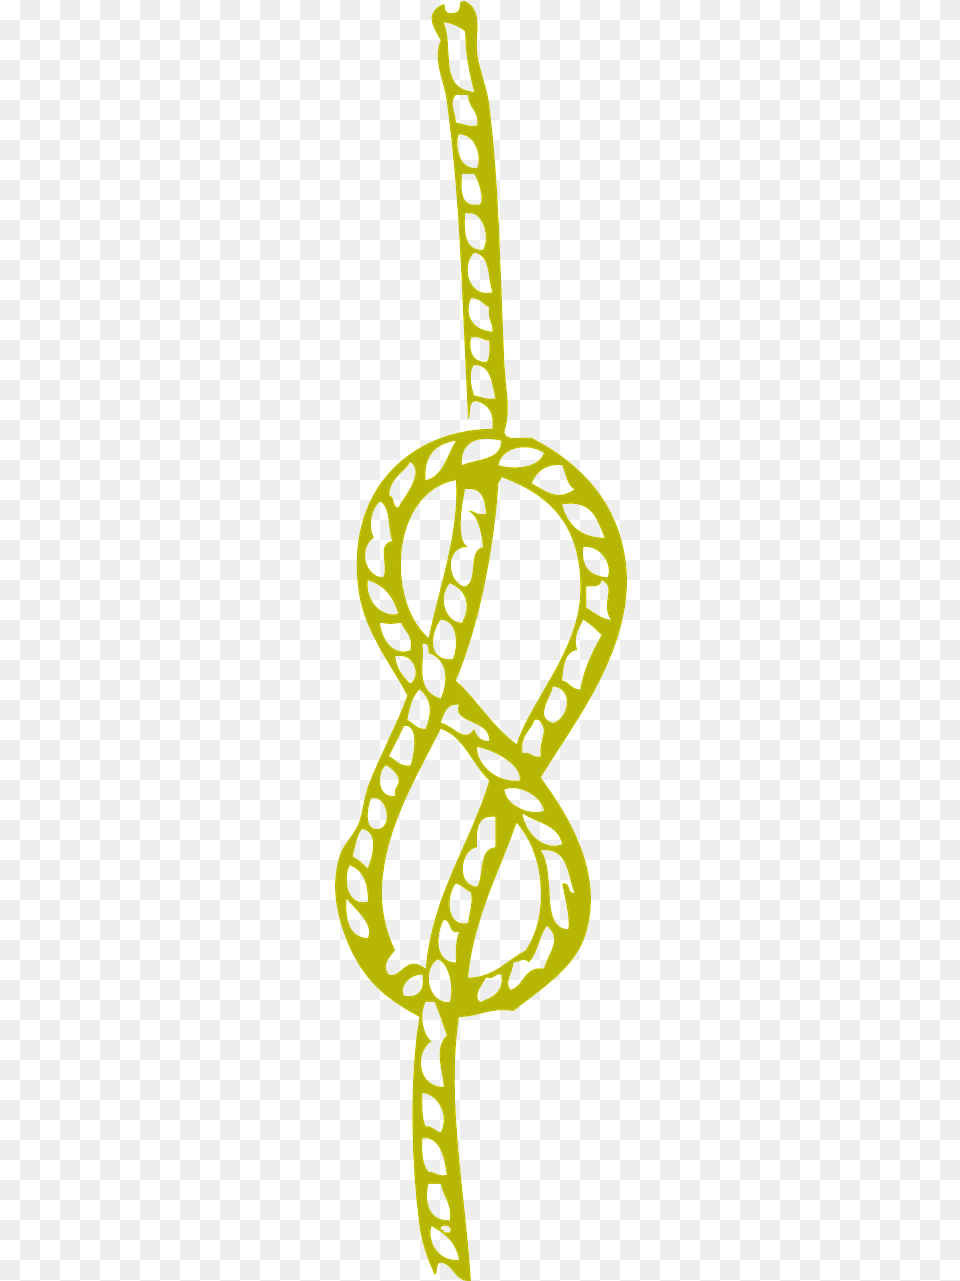 Rope Knot Clipart Png Image